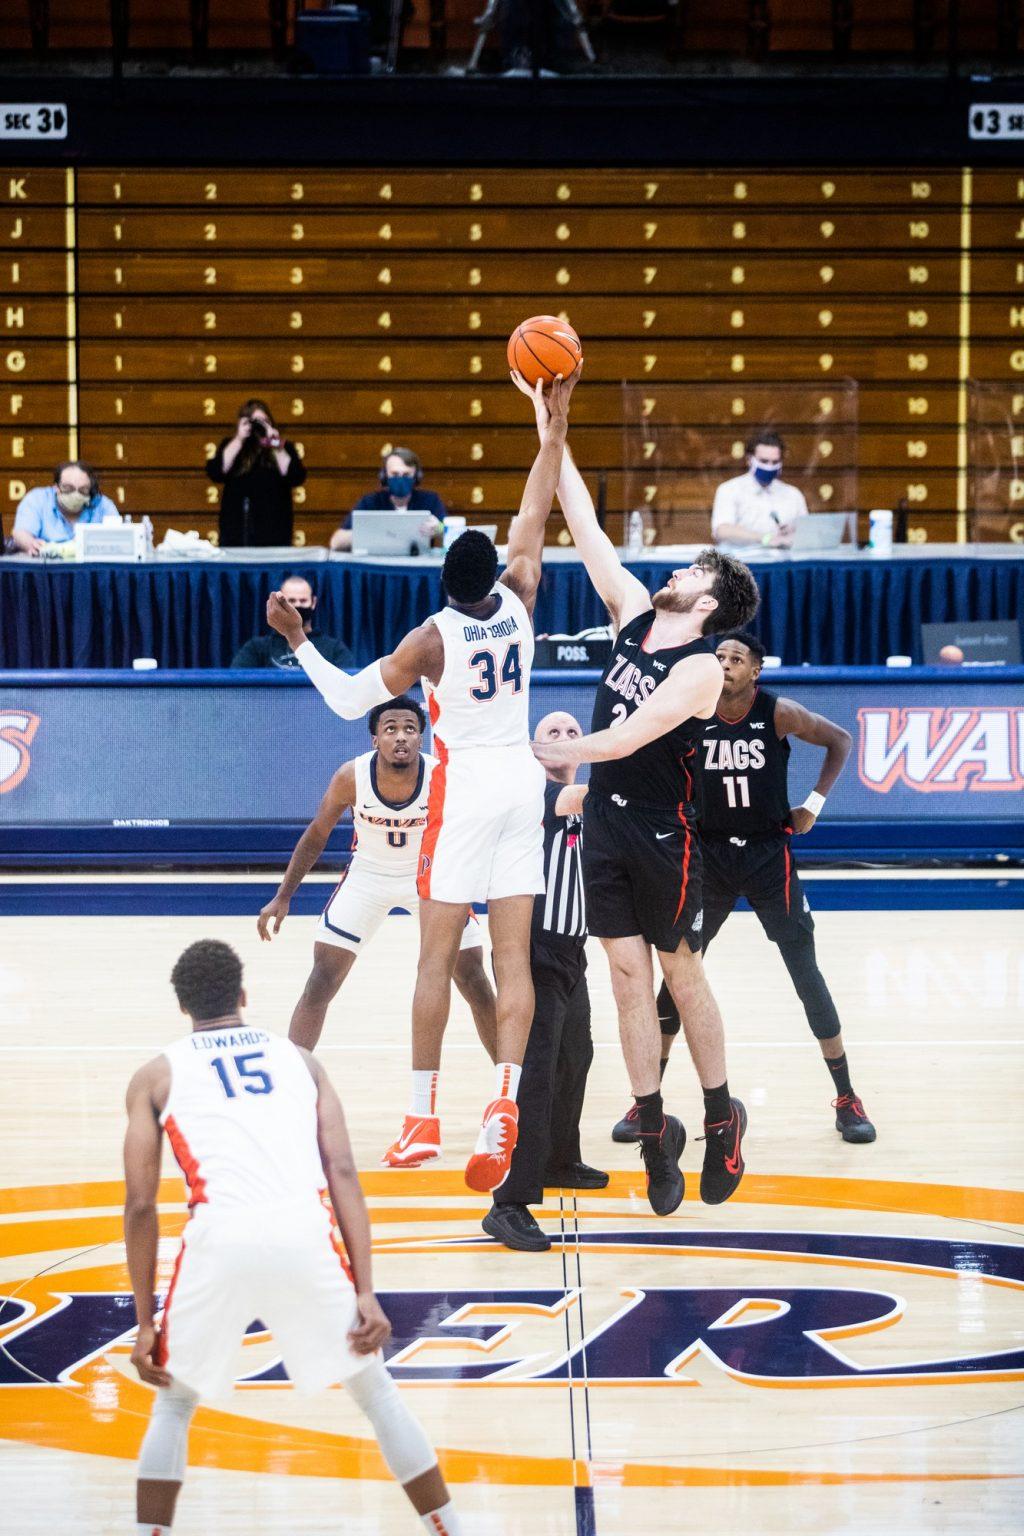 Junior center Victor Ohia Obioha wins the tipoff against Gonzaga's Drew Timme at the beginning of Saturday's game in Firestone Fieldhouse. Pepperdine got off to a hot start in the game, leading 16-7 after the first five minutes.